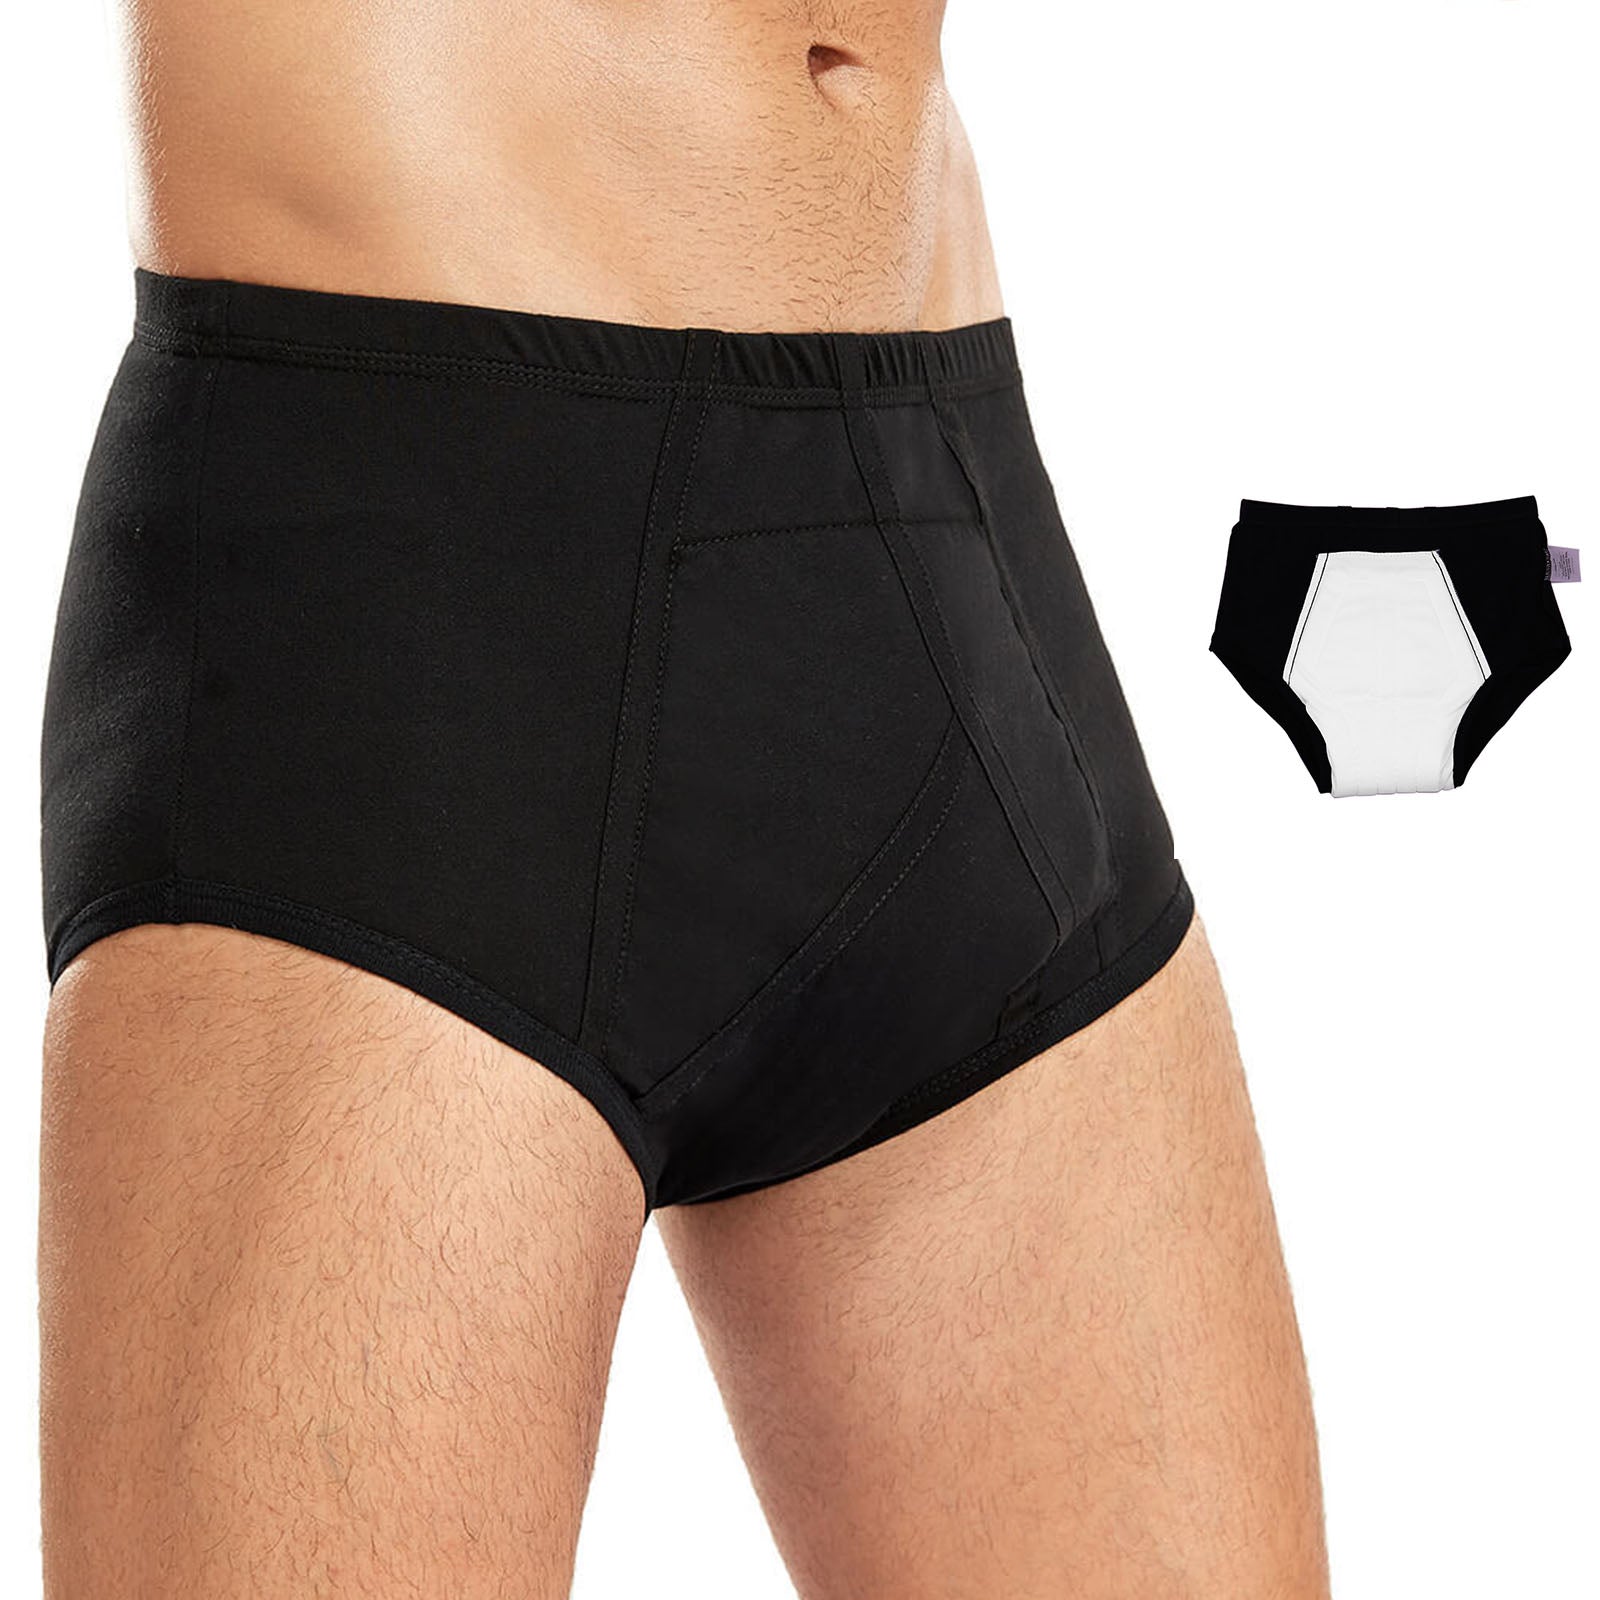 Breathable Incontinence Bladder Control Underwear For Men And